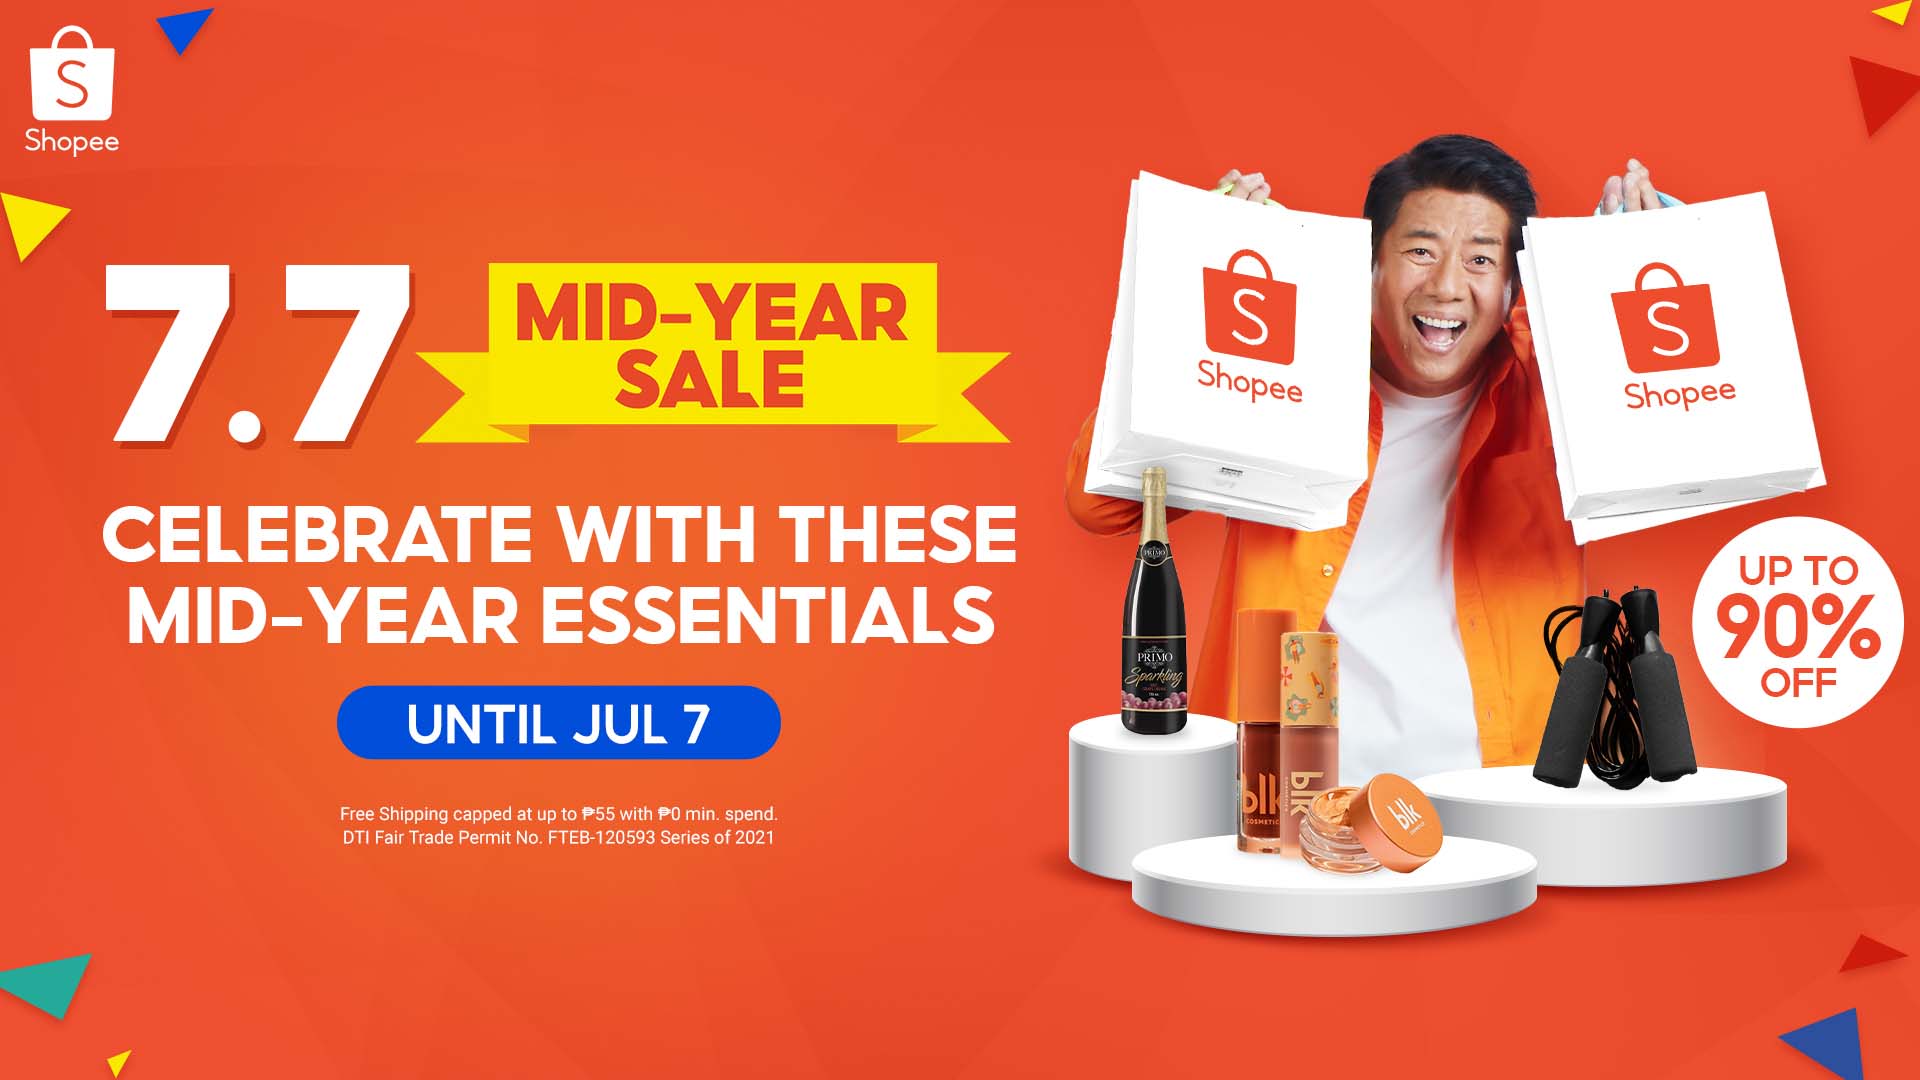 7 Items You can Get to Make the Rest of 2021 Yours at Shopee’s 7.7 Mid-Year Sale